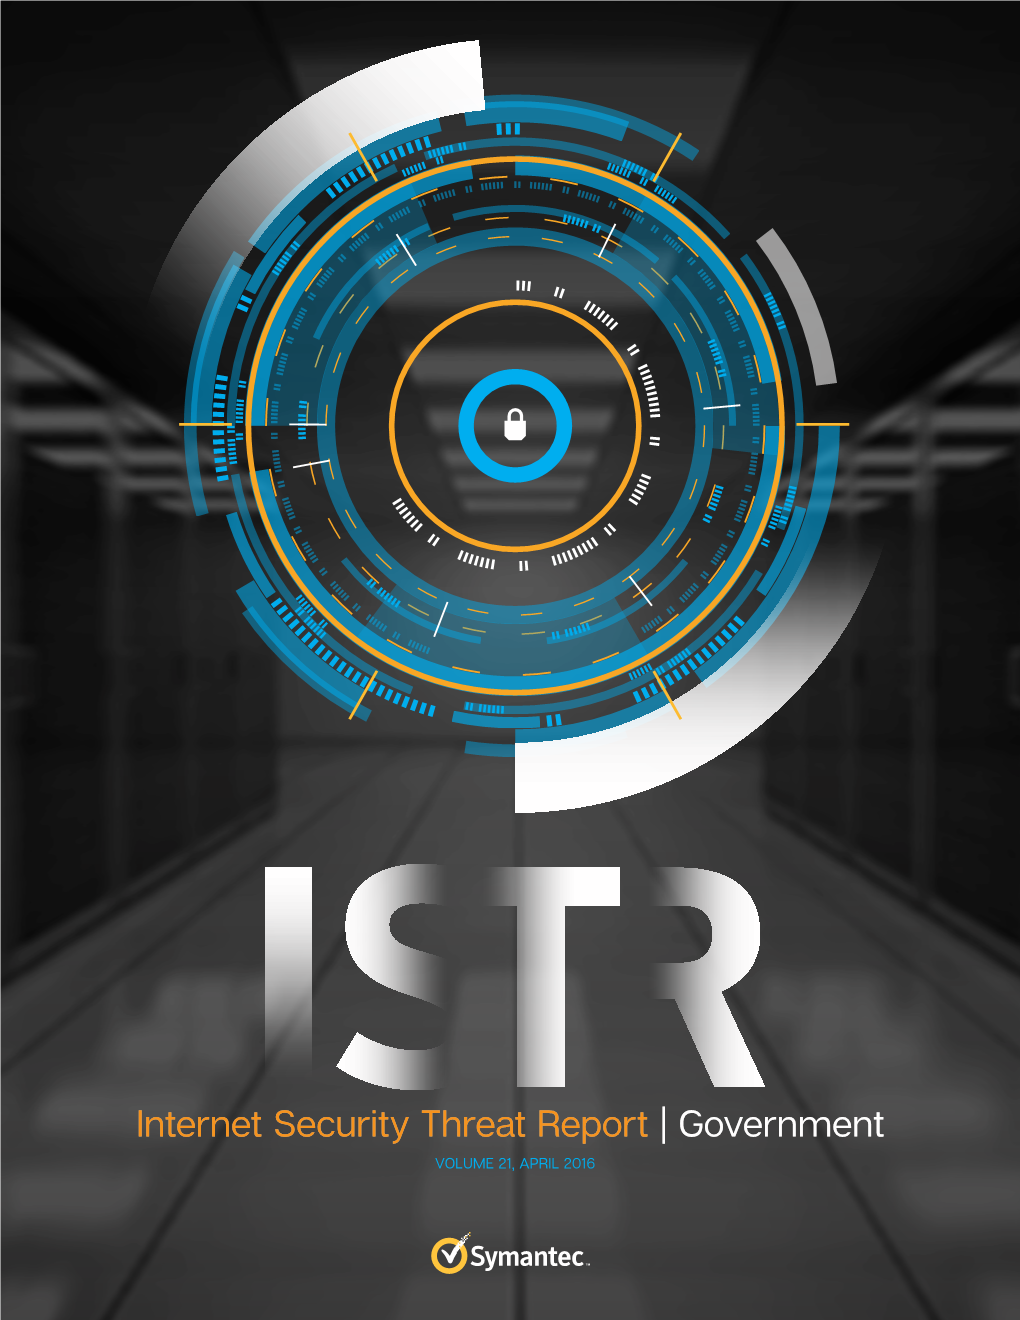 Internet Security Threat Report | Government VOLUME 21, APRIL 2016 TABLE of CONTENTS 2016 Internet Security Threat Report 2